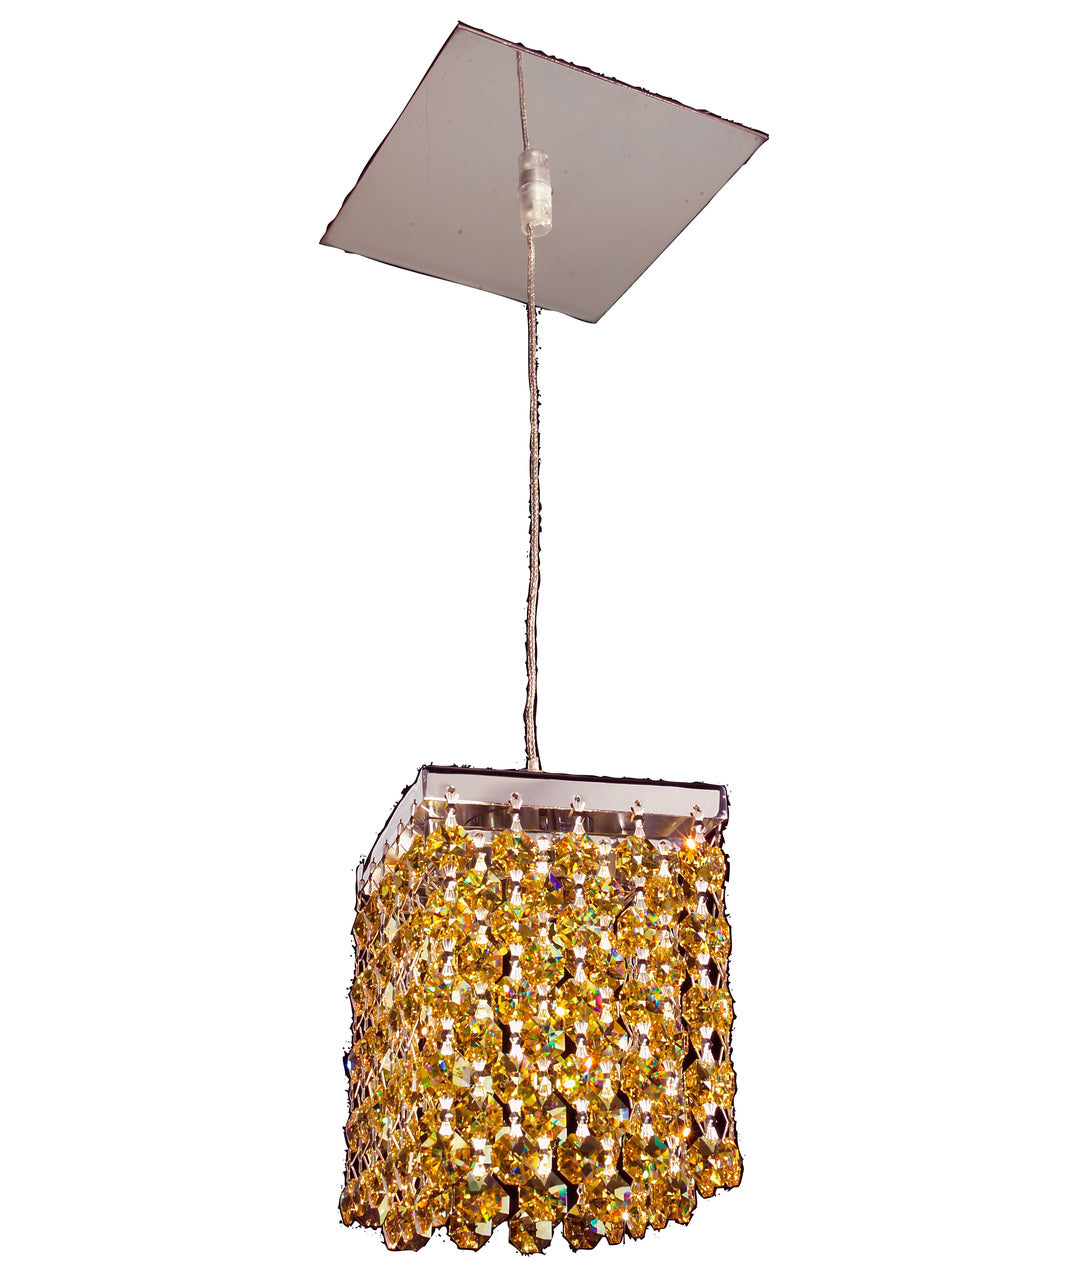 Classic Lighting 16101 SLT Bedazzle Crystal Pendant in Chrome